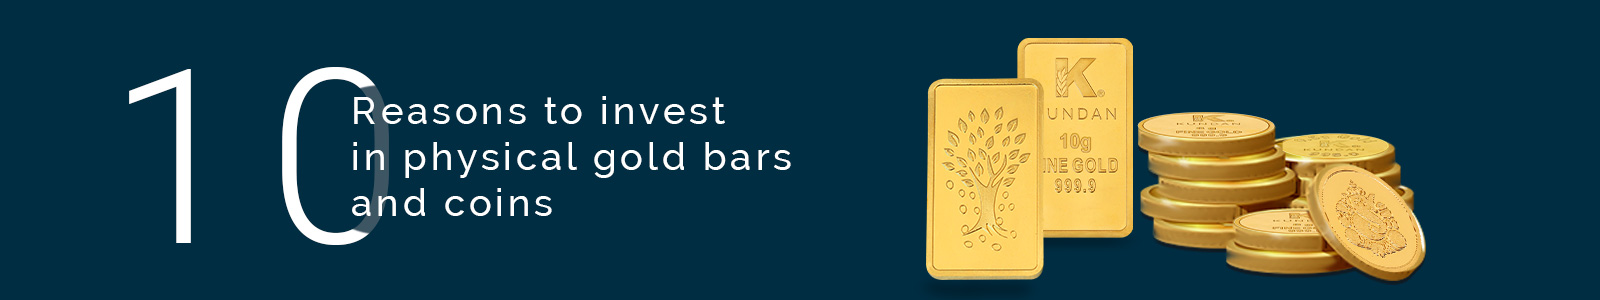 10 Reasons to Invest in Physical Gold Bars and Coins